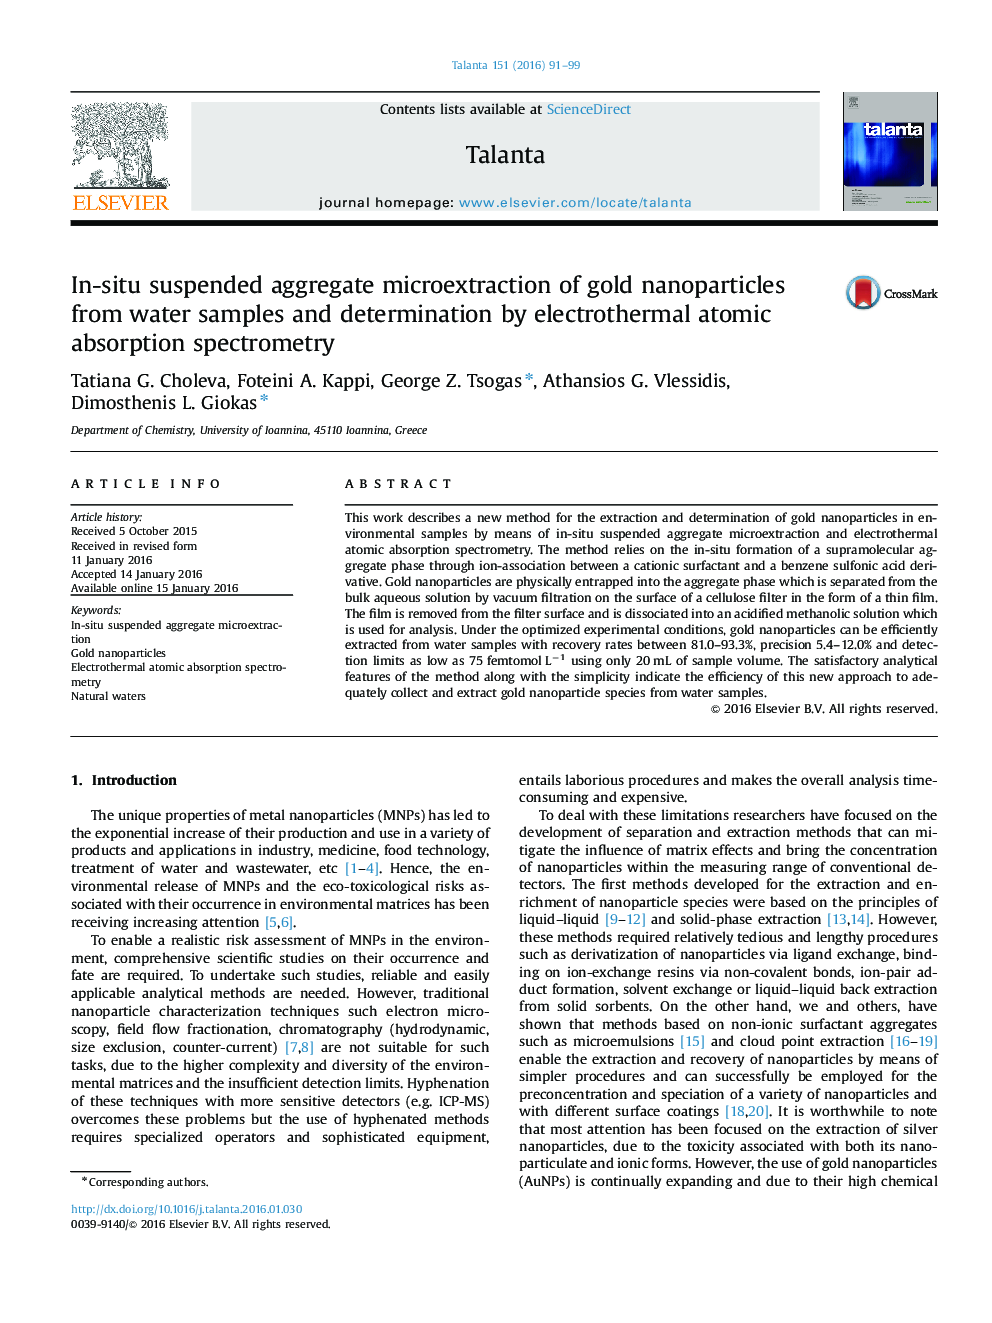 In-situ suspended aggregate microextraction of gold nanoparticles from water samples and determination by electrothermal atomic absorption spectrometry